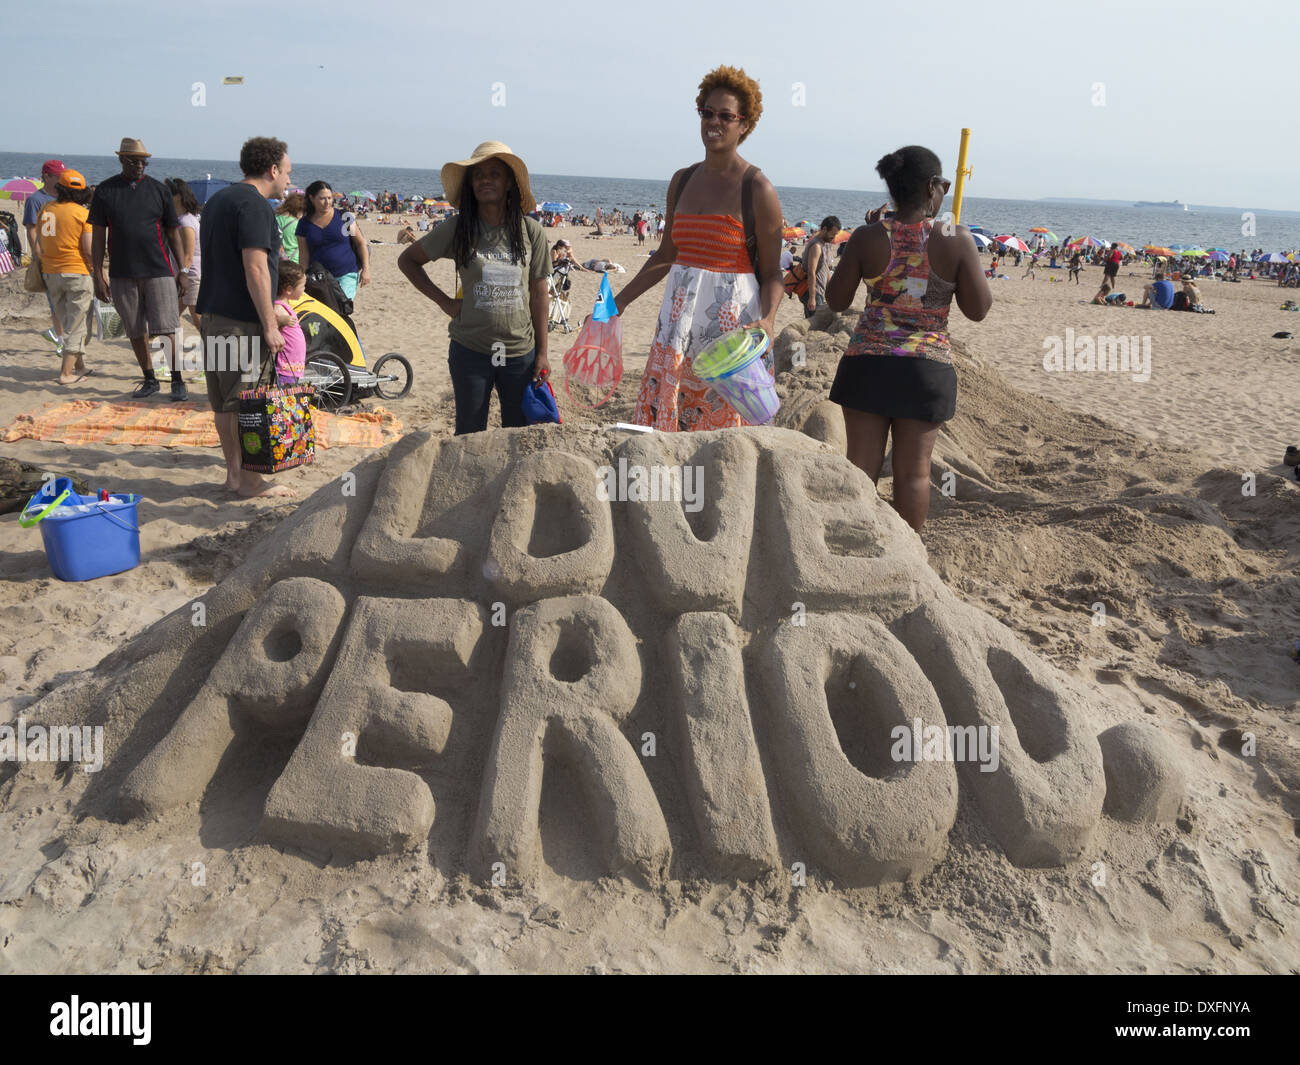 Participants in the 23rd Annual Coney Island Sand Sculpting Competition in Brooklyn, NY, 2013. Stock Photo